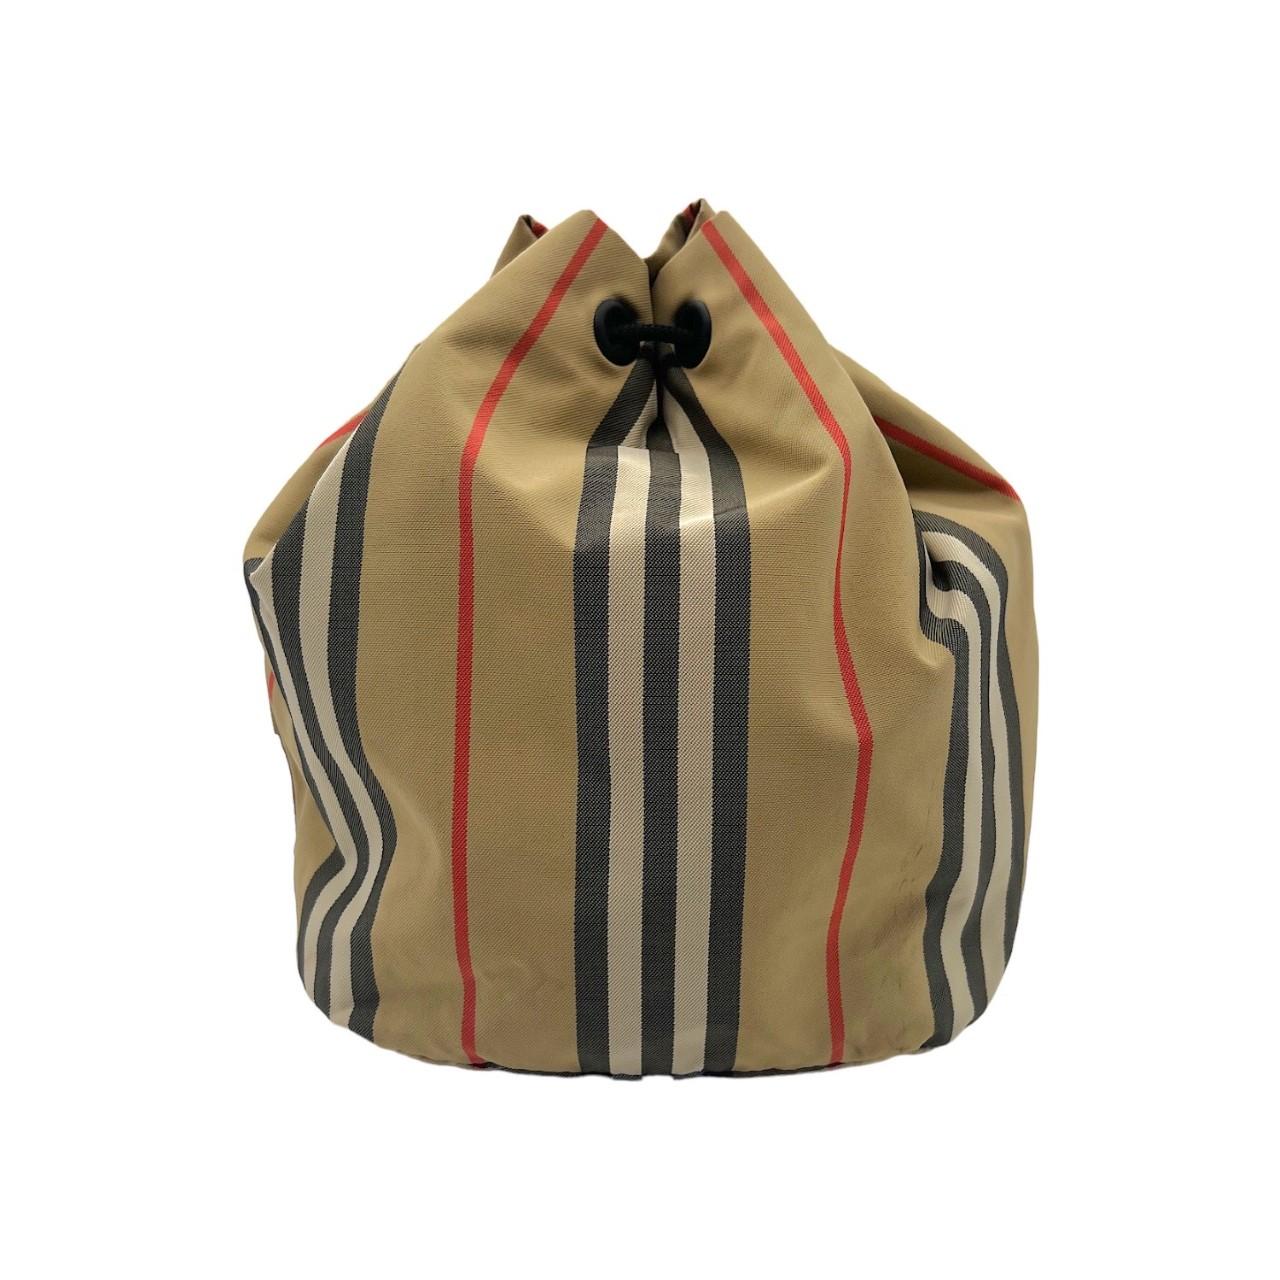 Burberry Phoebe Heritage Stripe Bucket Bag. Made in Moldova, this drawstring bag is finely crafted of a nylon exterior with Burberry's iconic Heritage Stripe pattern and matte black hardware. It features the classic Burberry logo lettering and it